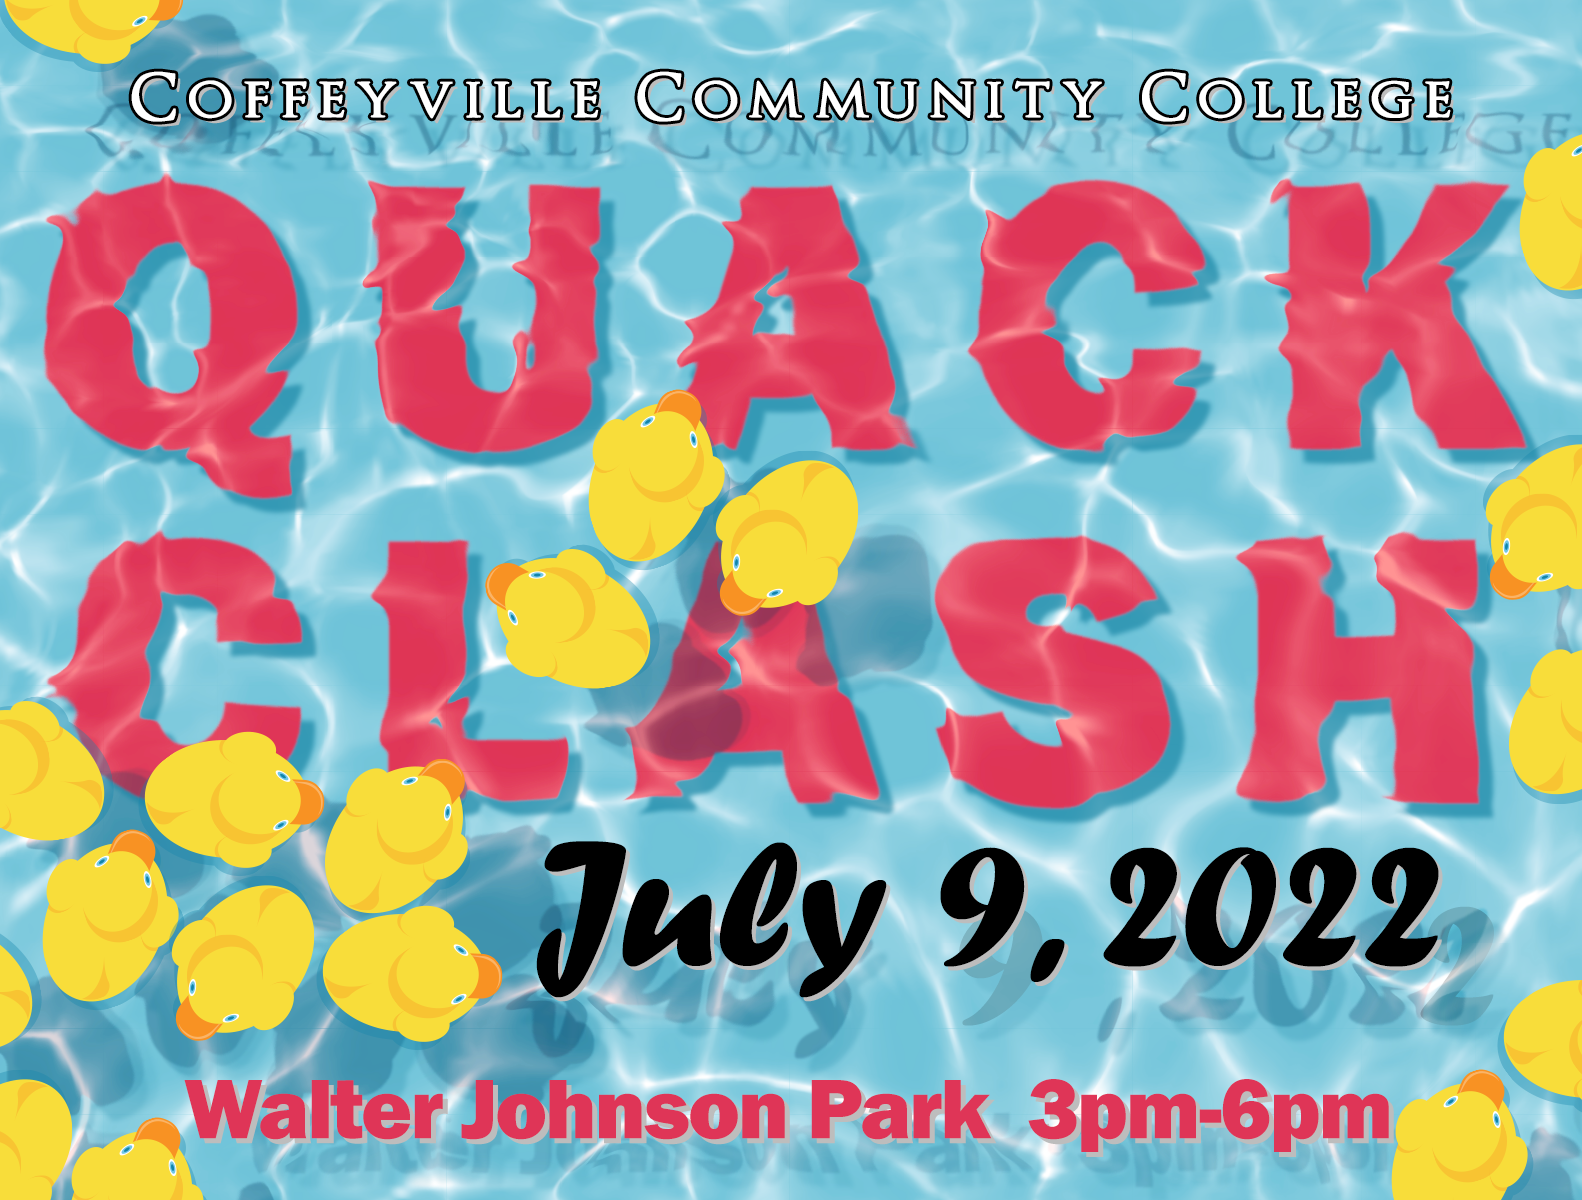 2022 CCC Quack Clash Scheduled for July 9th